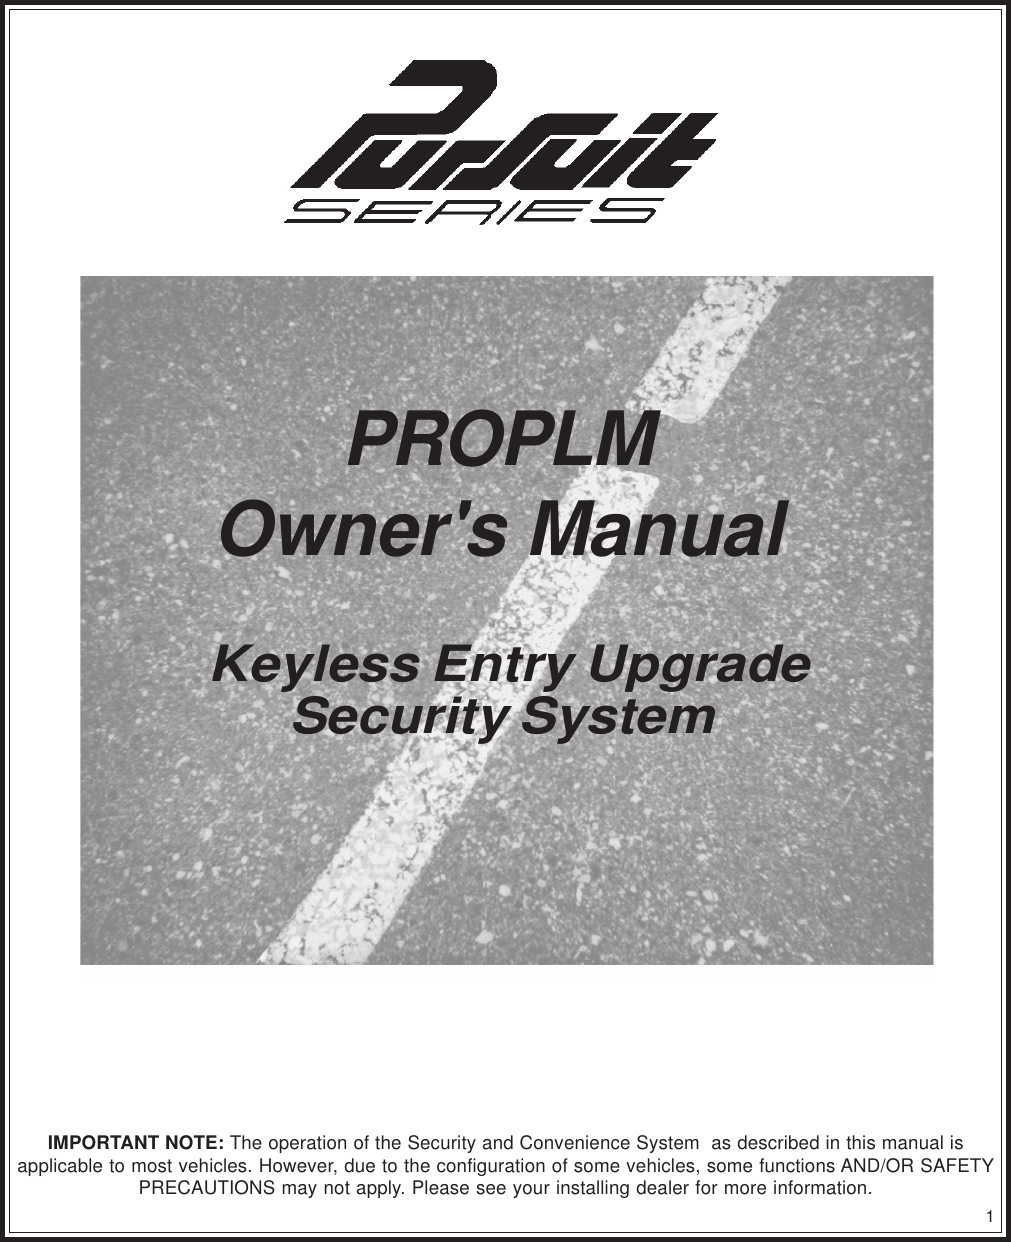 1IMPORTANT NOTE: The operation of the Security and Convenience System  as described in this manual isapplicable to most vehicles. However, due to the configuration of some vehicles, some functions AND/OR SAFETYPRECAUTIONS may not apply. Please see your installing dealer for more information.PROPLMOwner&apos;s Manual Keyless Entry UpgradeSecurity System